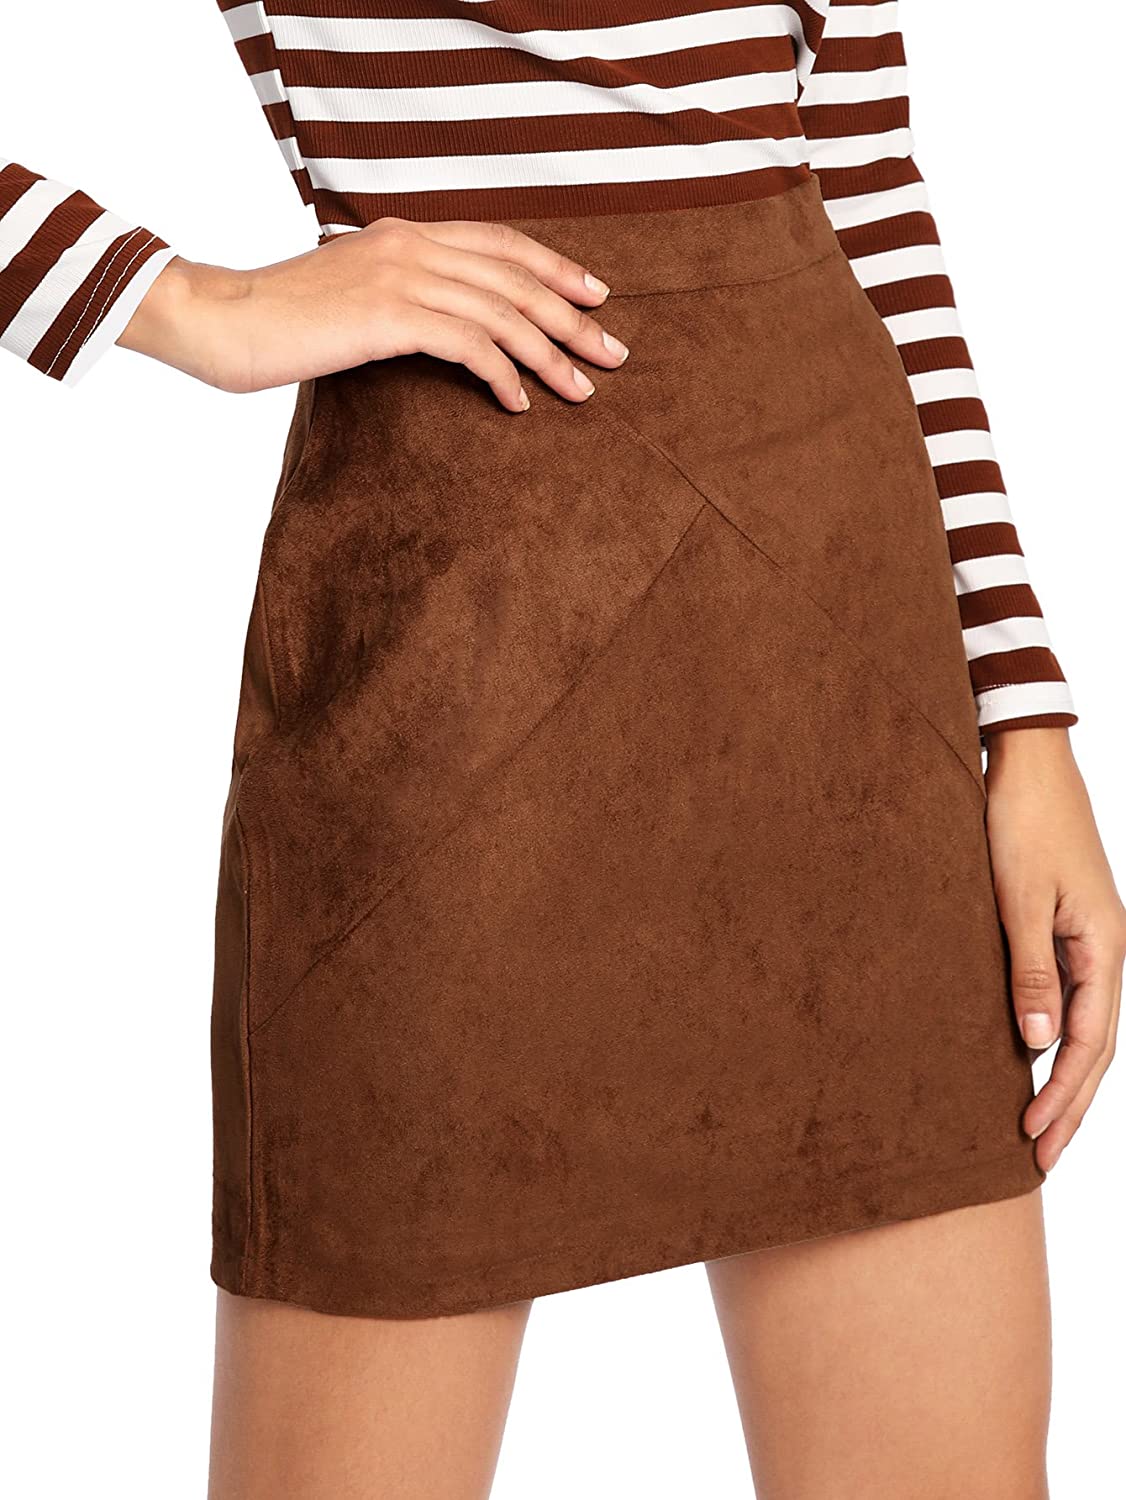 Suede Zip Skirts Outfits